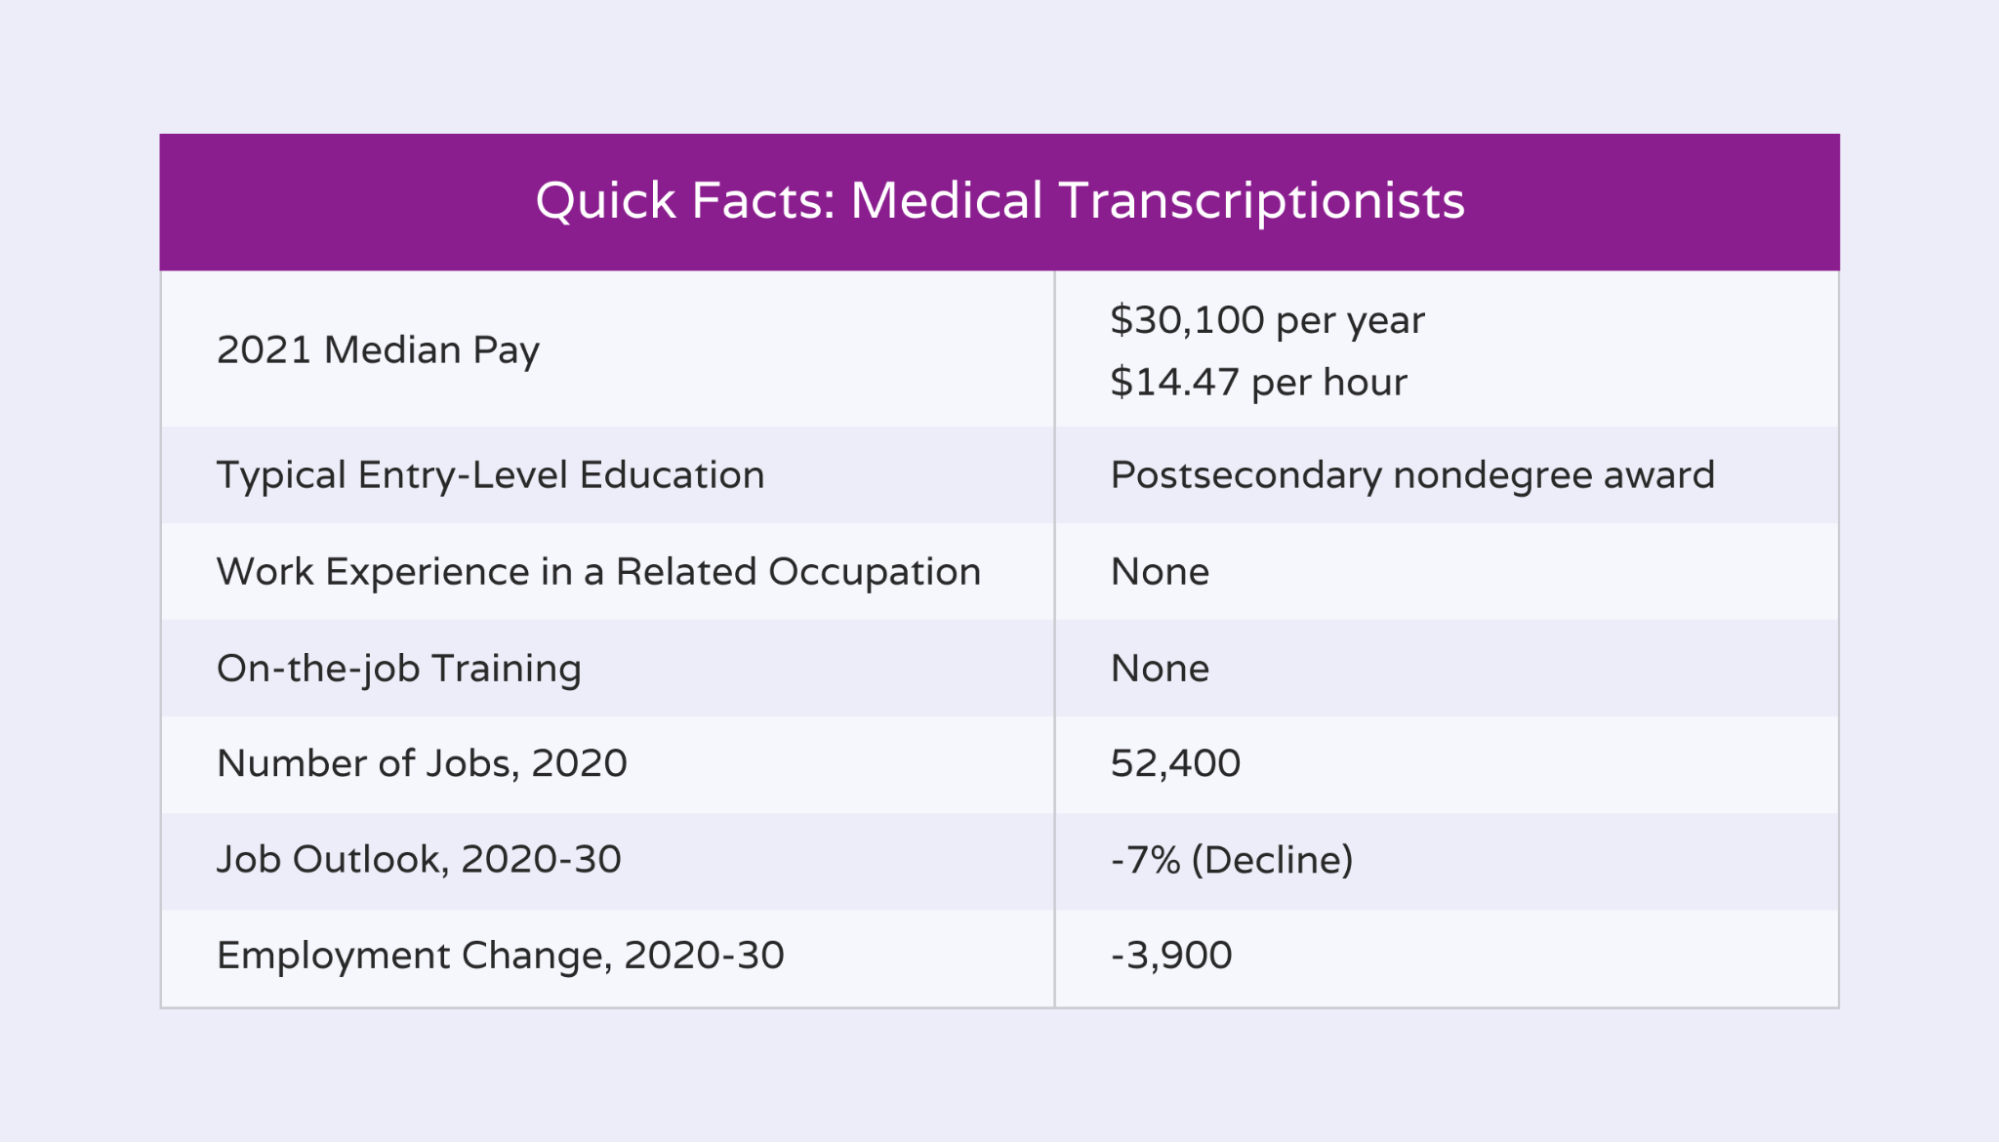 Table showing facts about medical transcriptionist jobs including salary